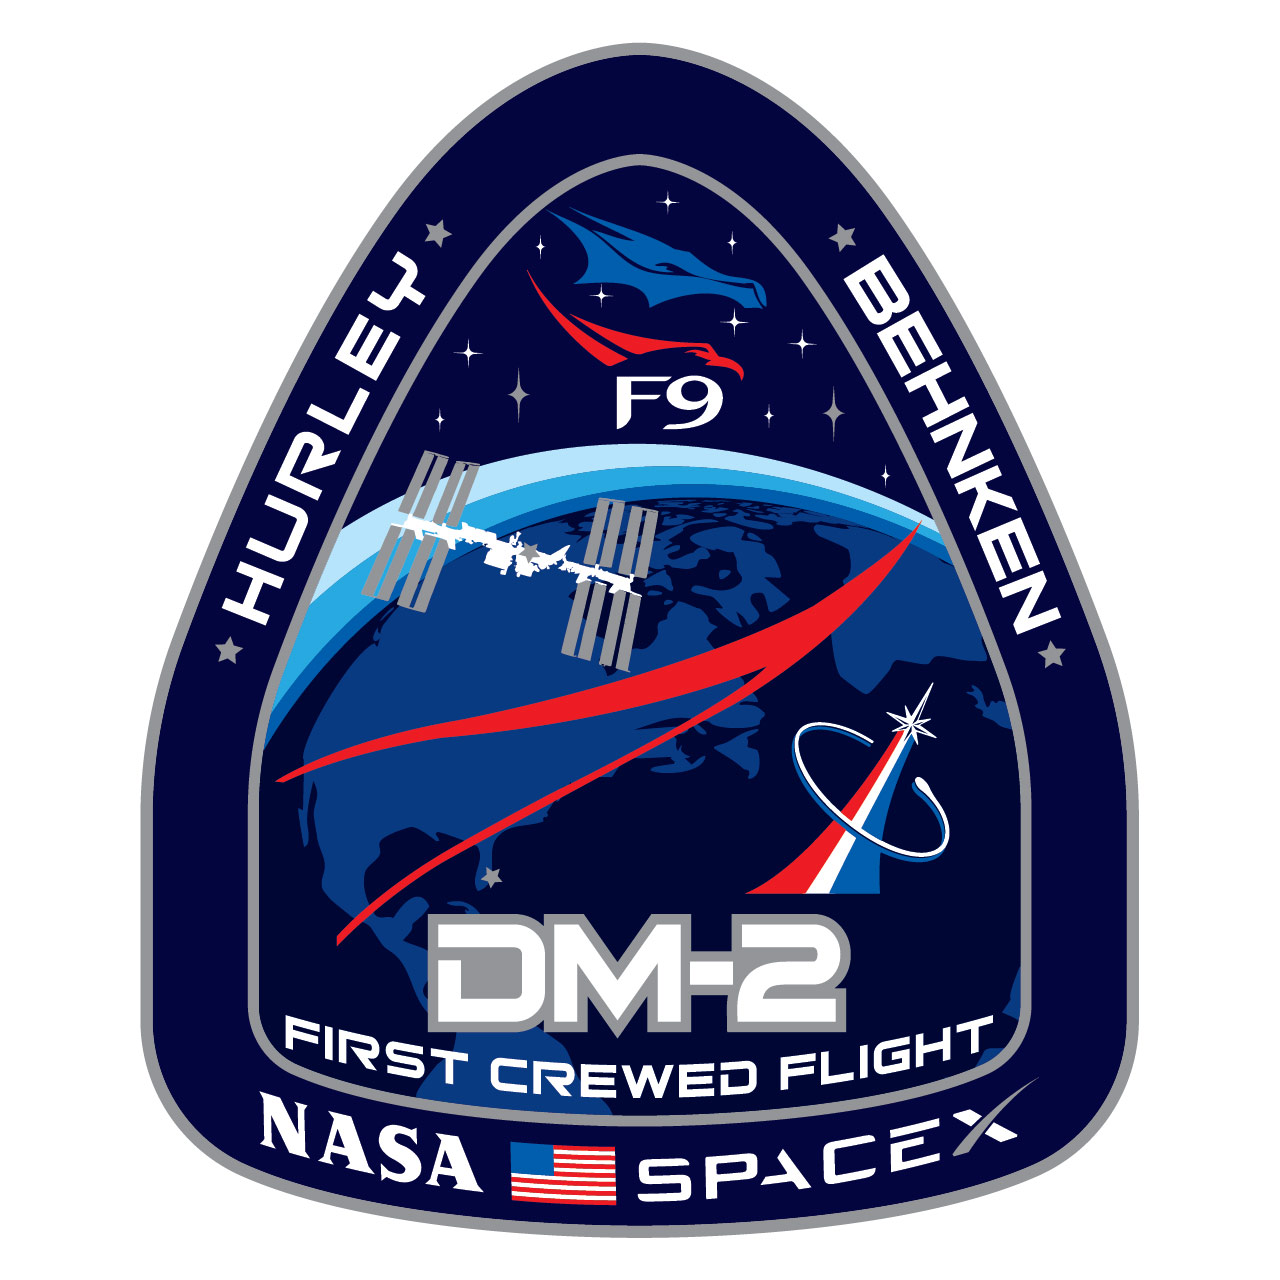 Nasa Falcon 9 Space X SpaceX DM-2 Astronauts Hurley Behnken First Crewed Flight Dragon ISS International Space Station Mission Patch Combo